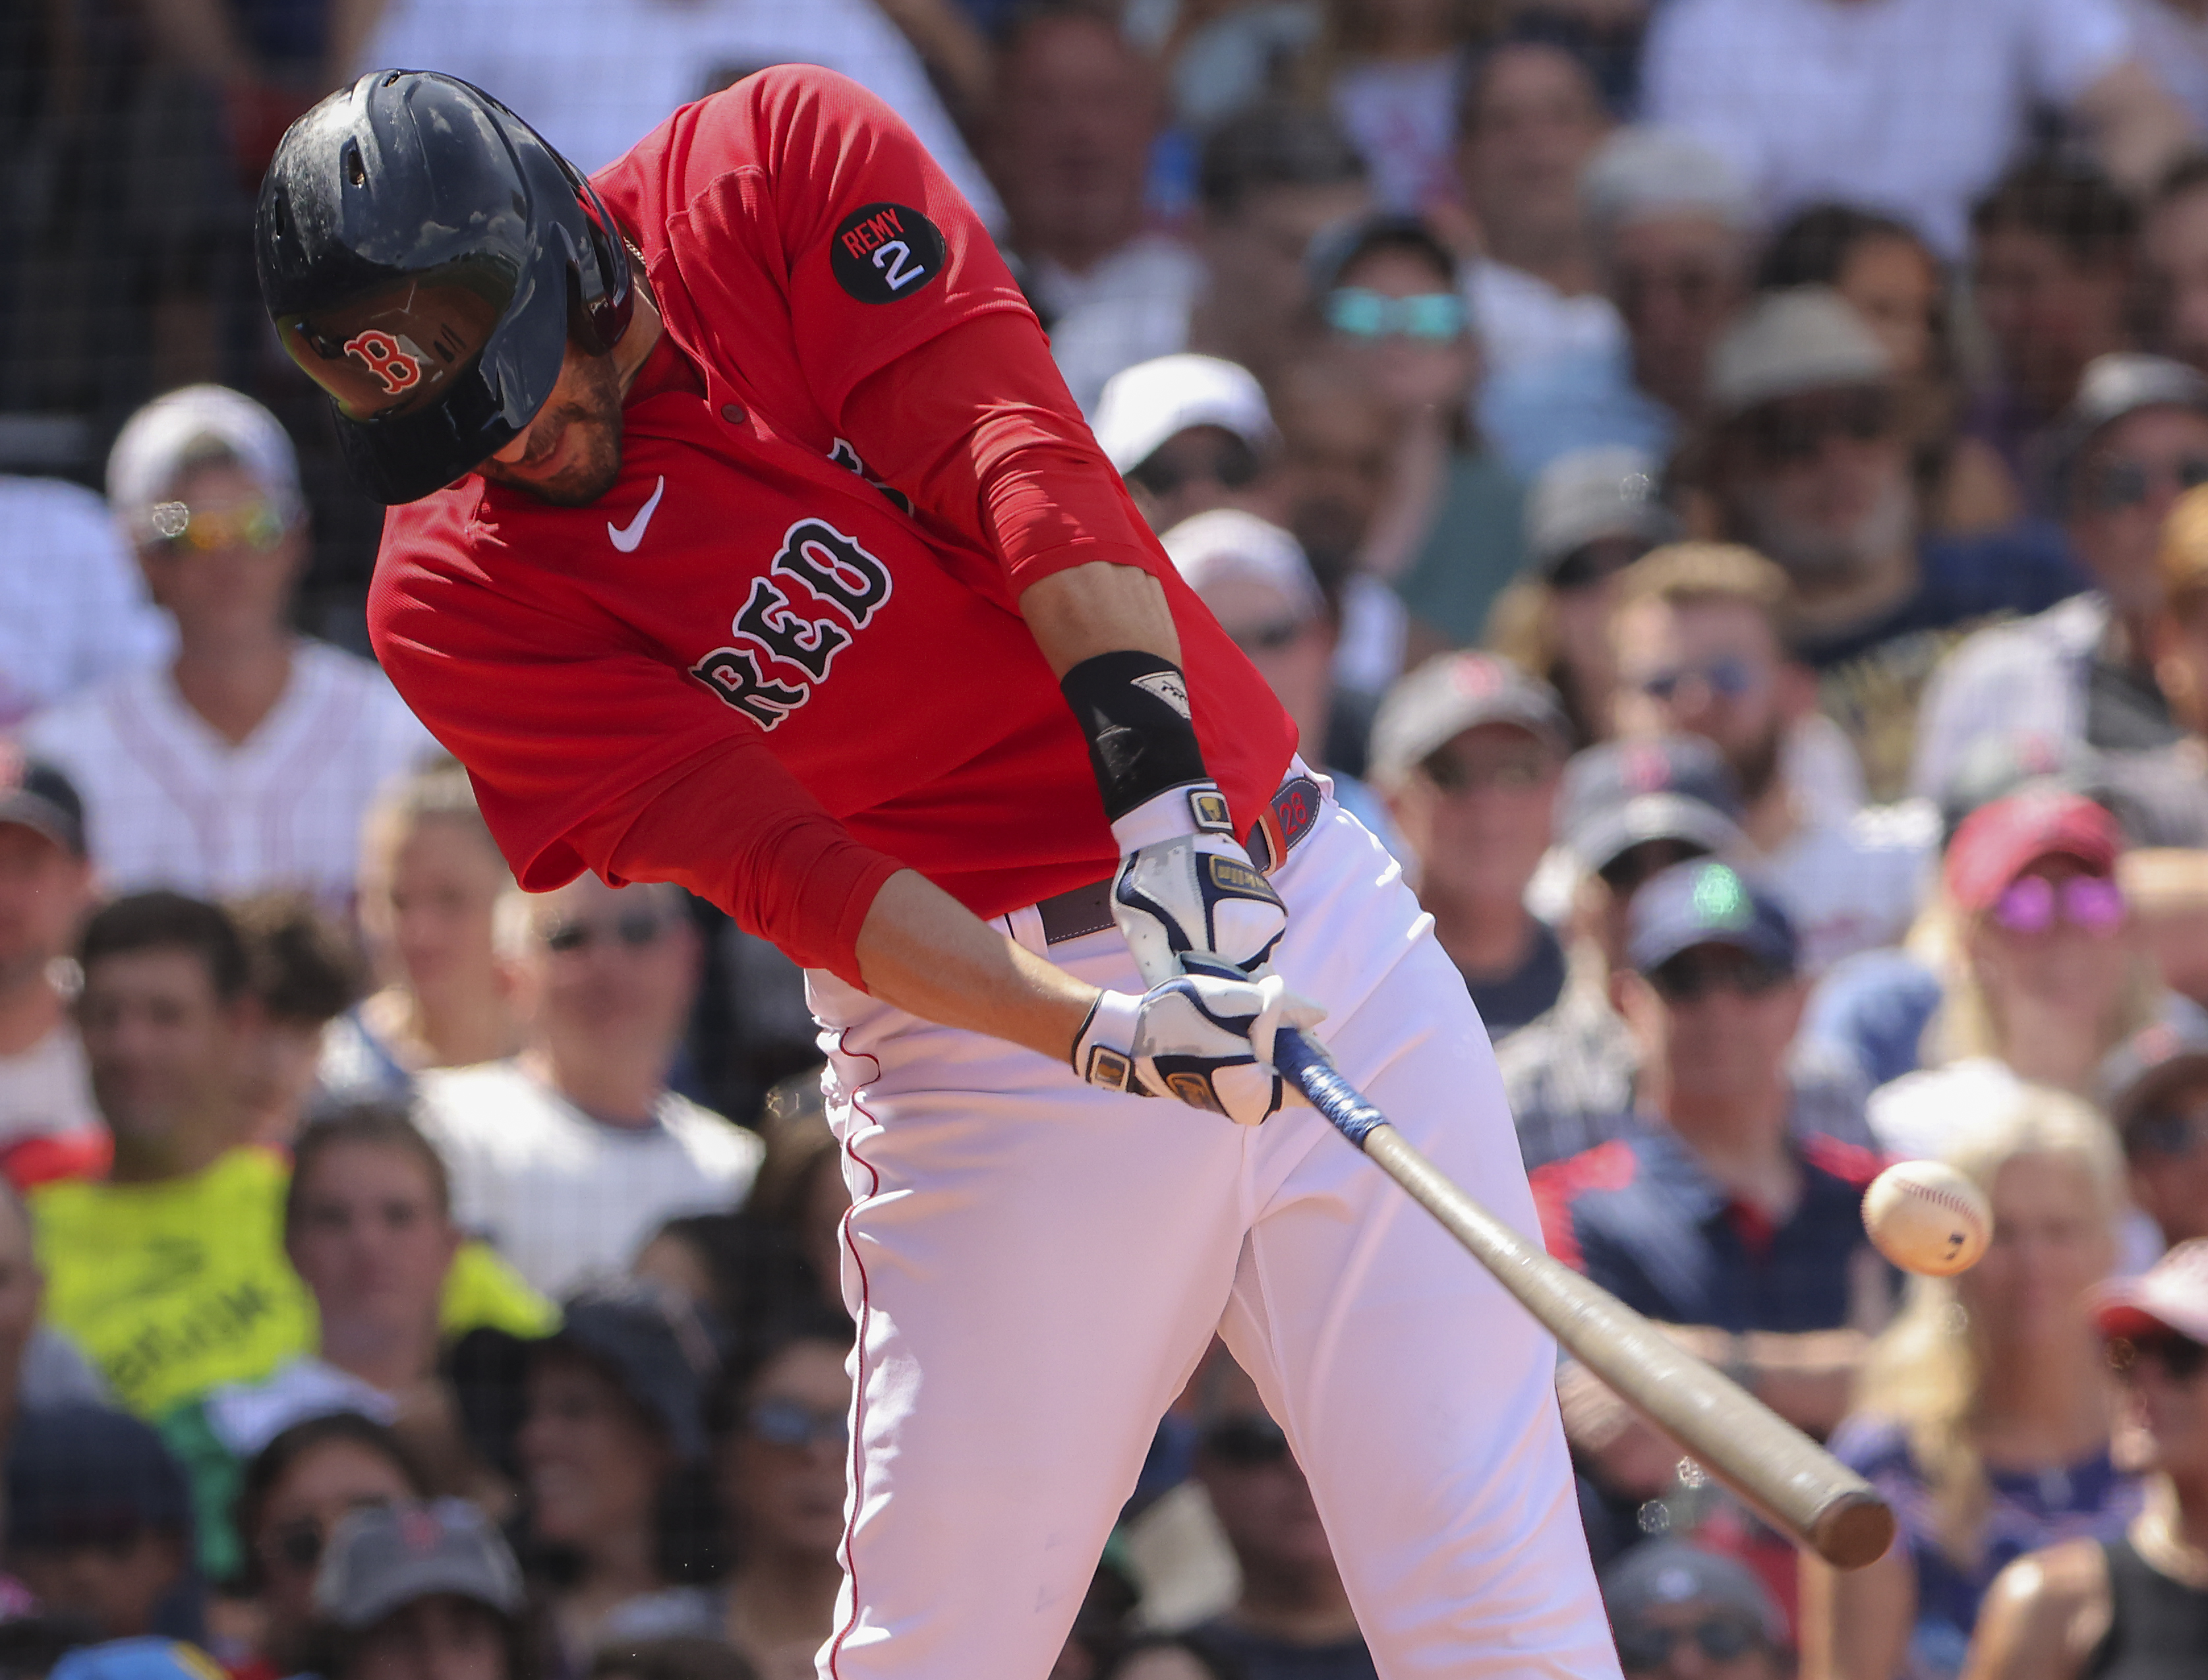 J.D. Martinez could be MVP, if not for one small problem 